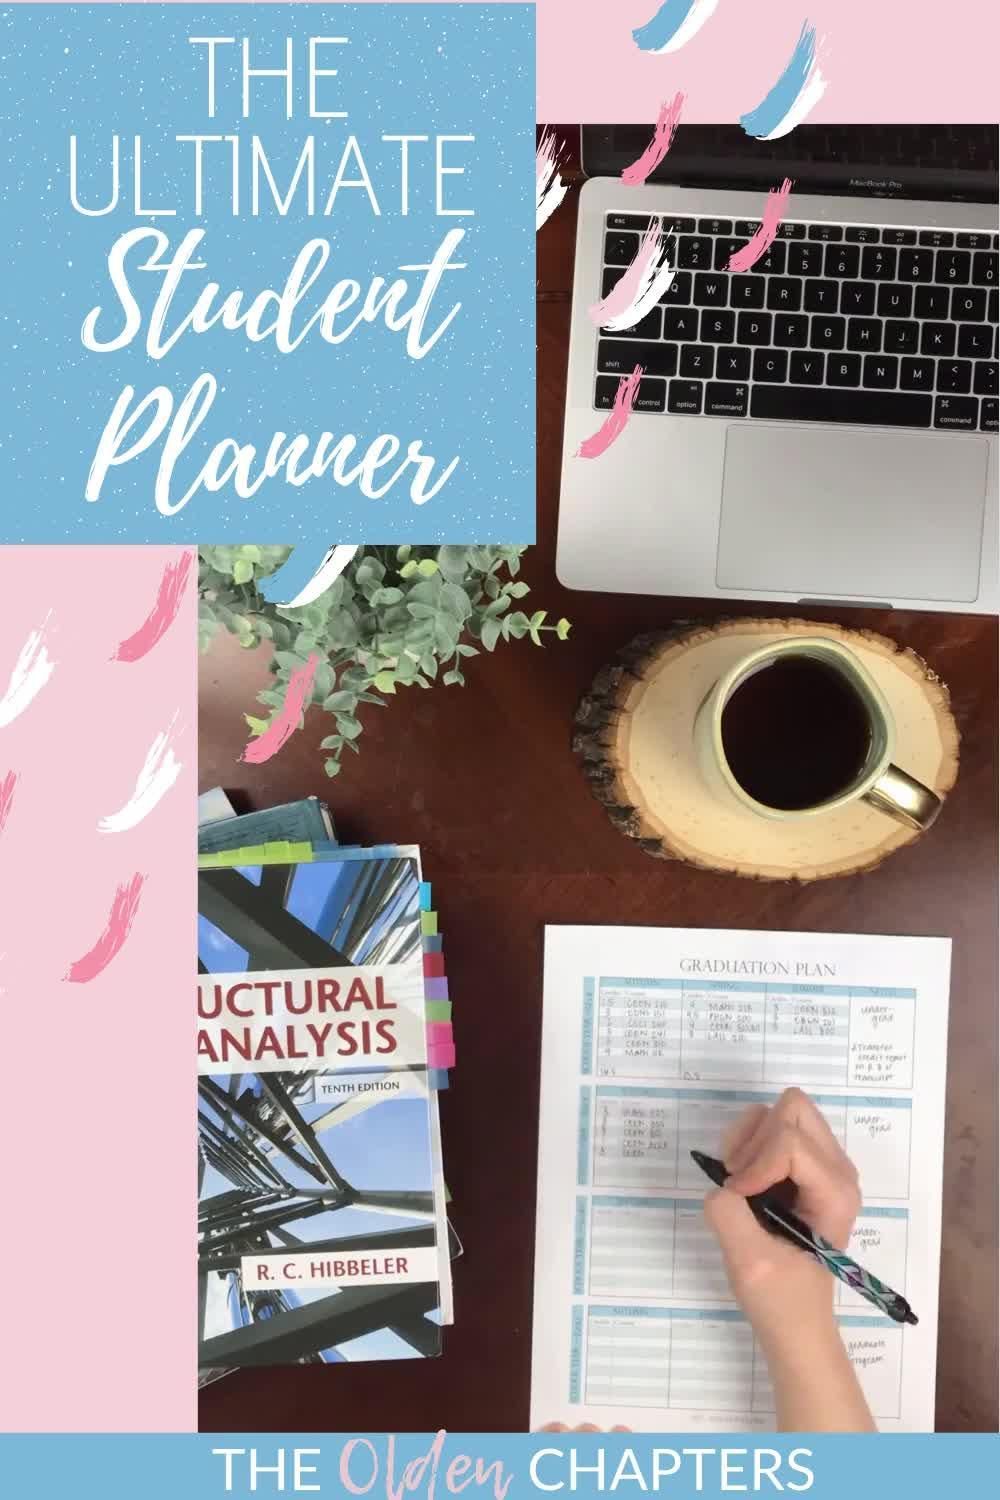 The Ultimate Study Printable Planner - The Ultimate Study Printable Planner -   19 diy Organization student ideas